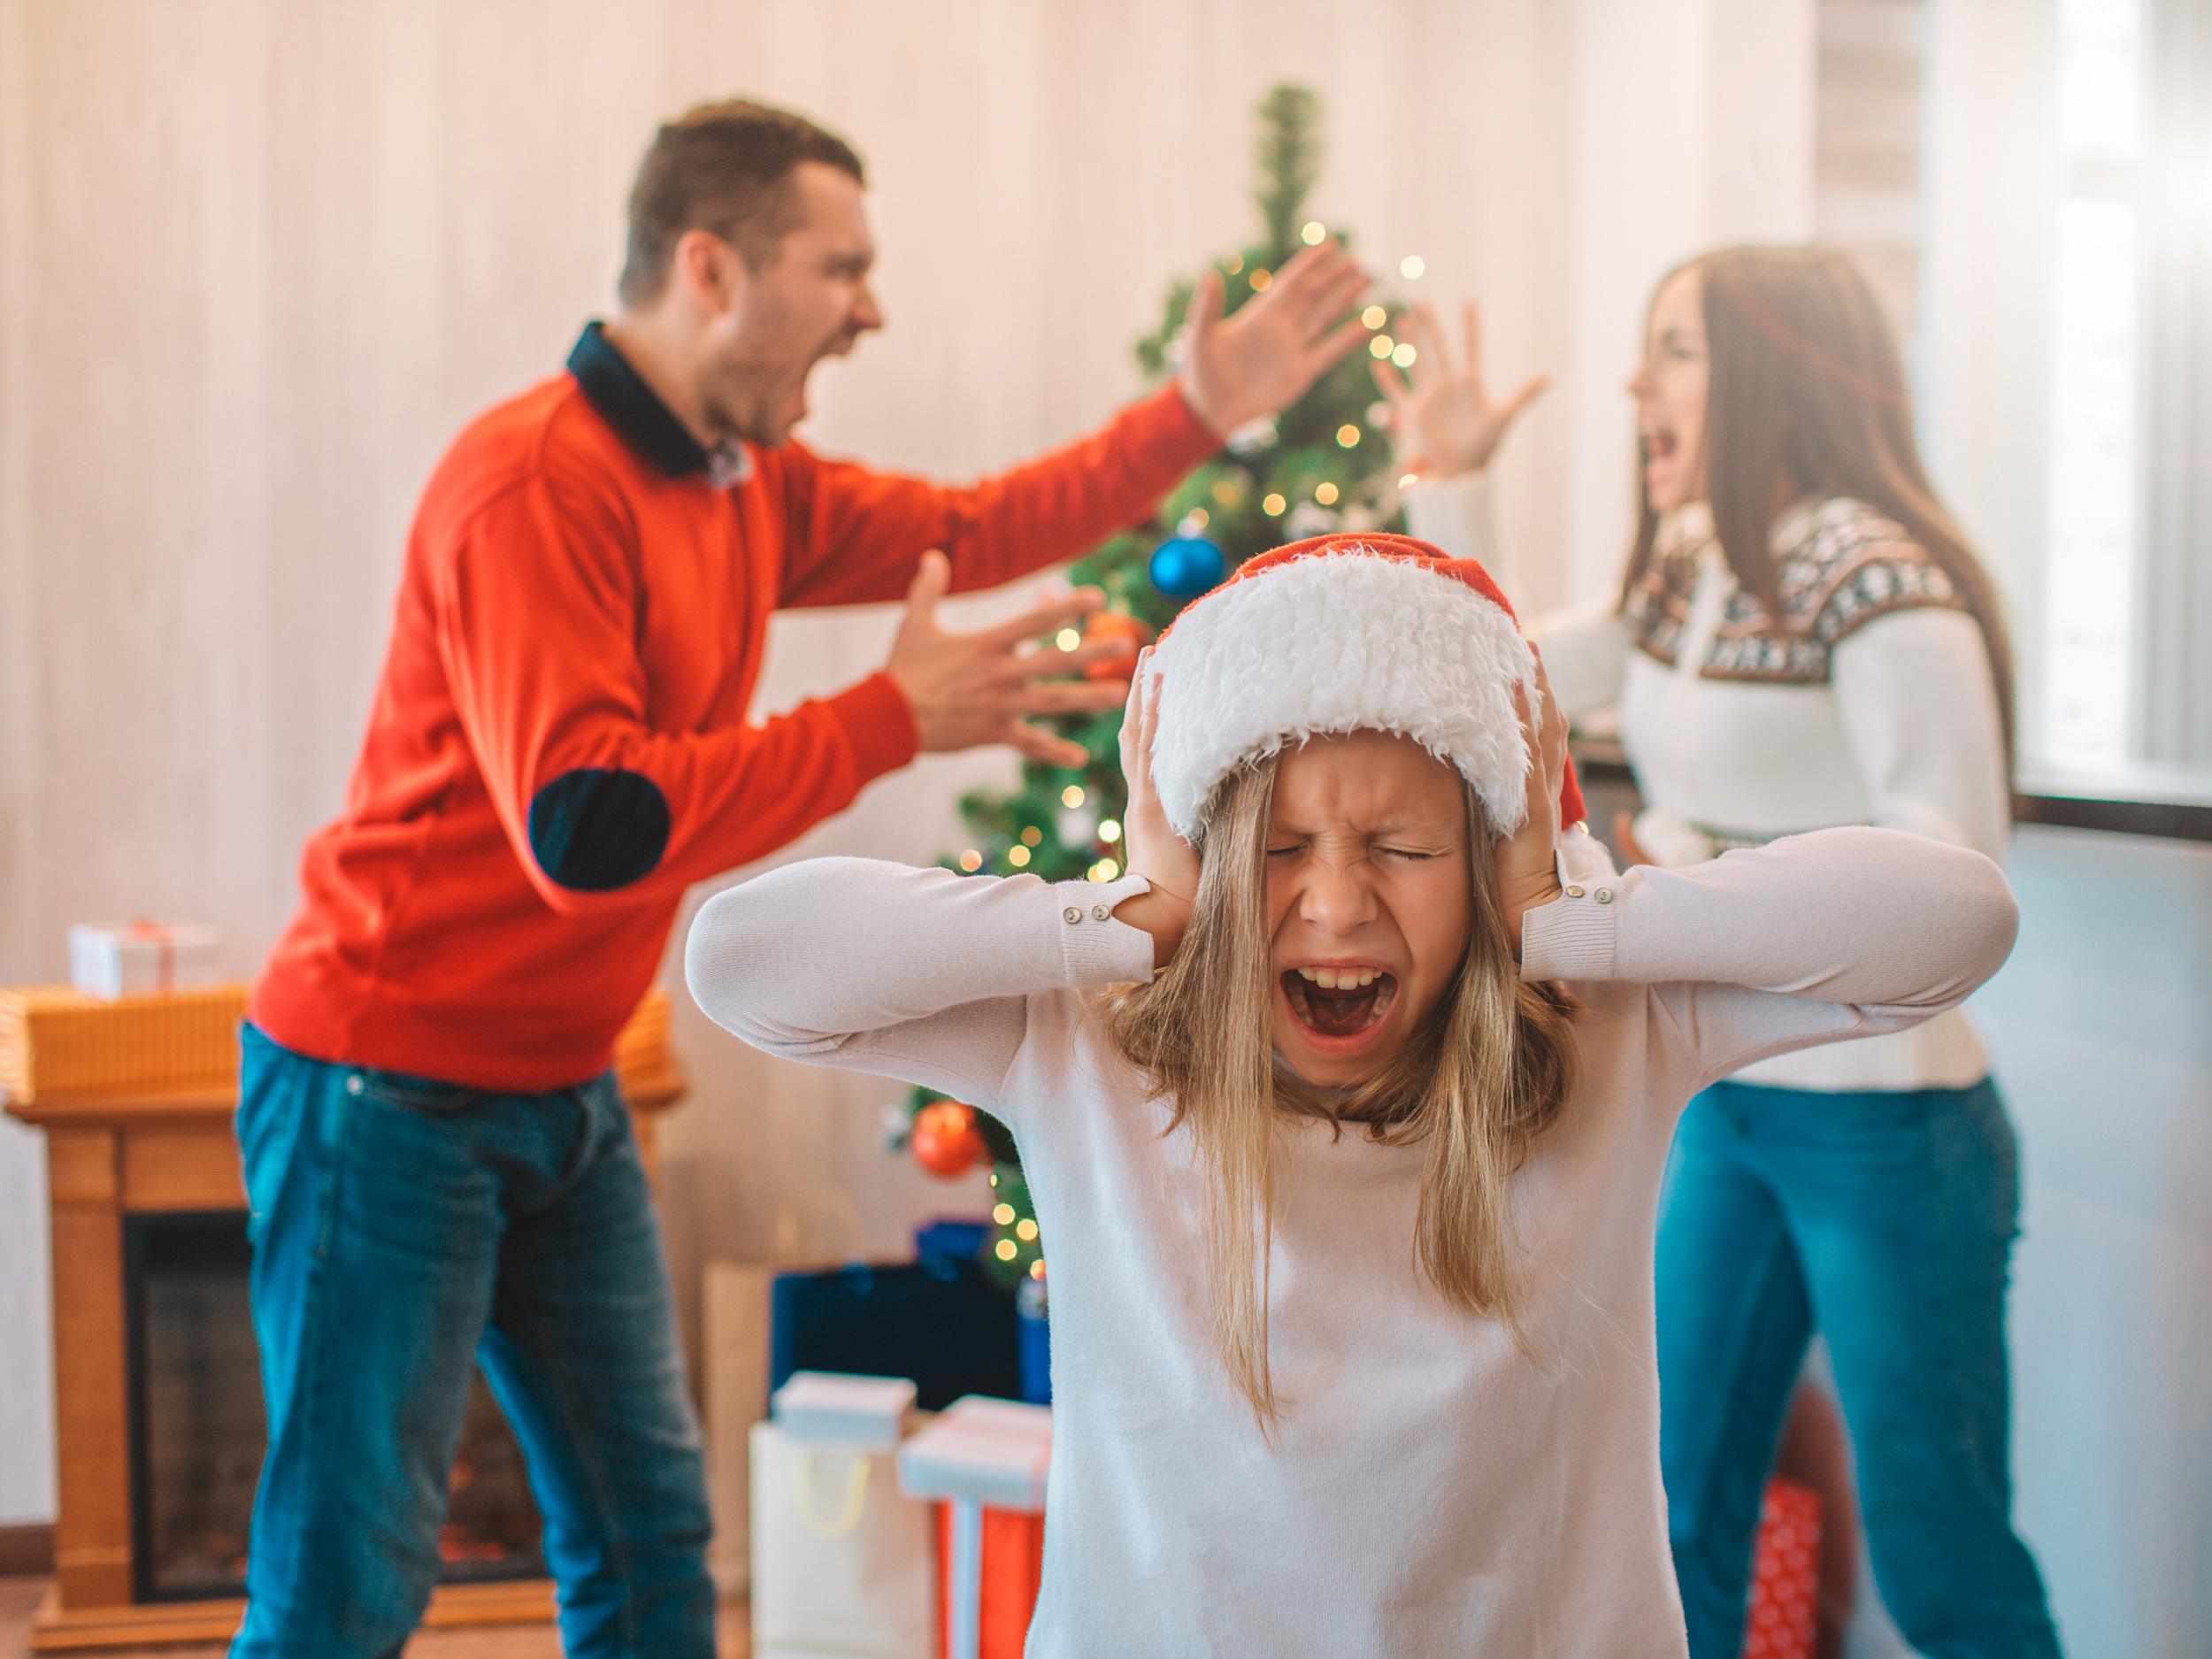 The average family will have at least one row on Christmas Day, according to the survey